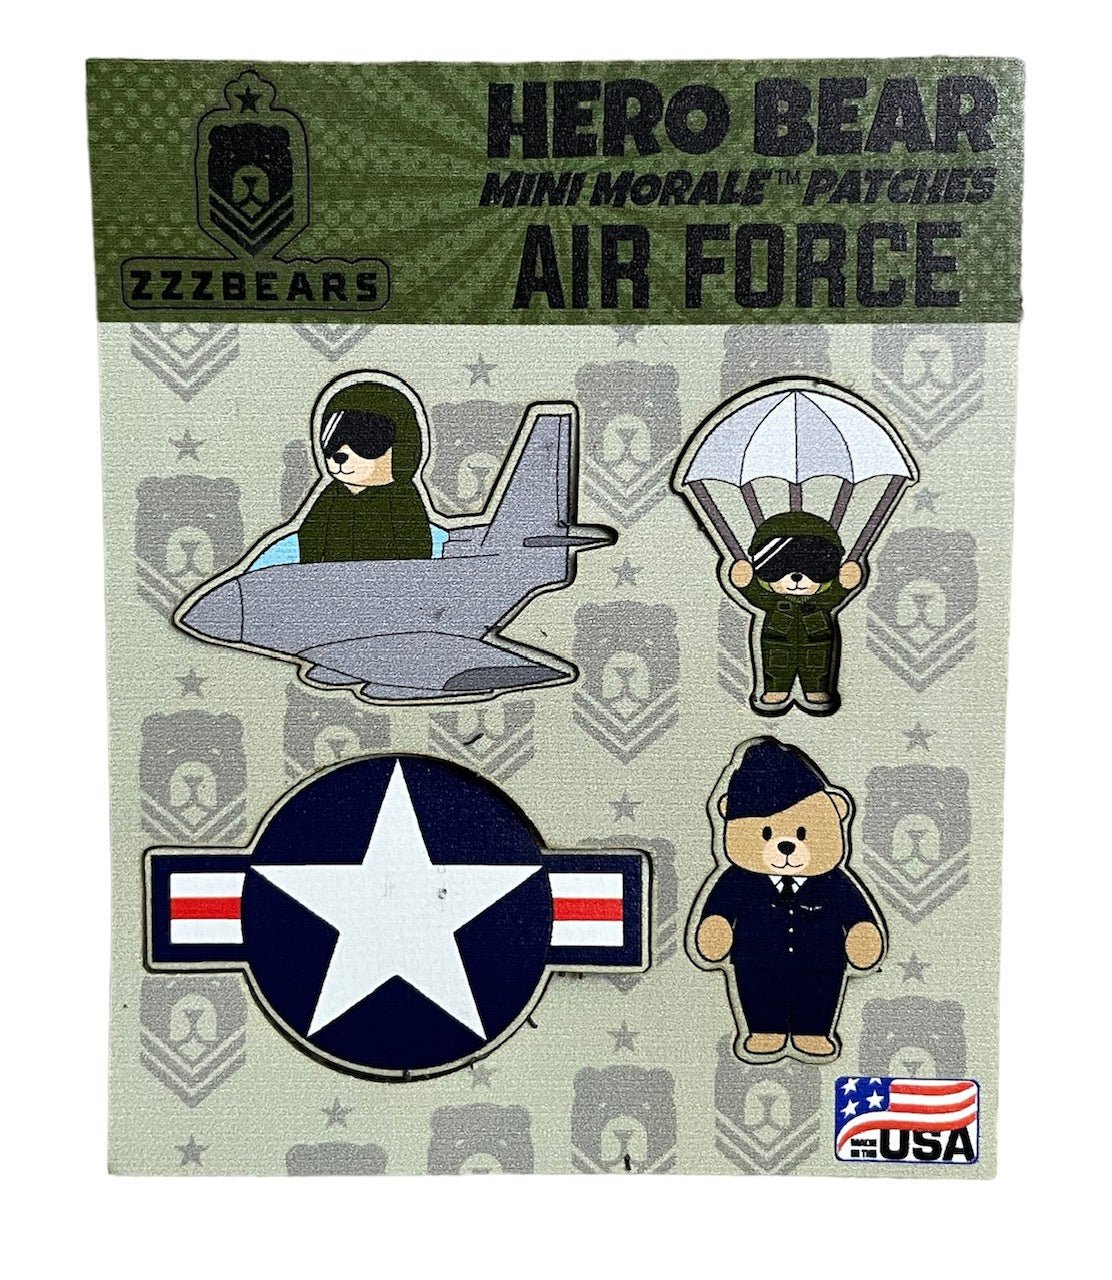 Design your super airforce, military patches and logo by Aeroart_zh